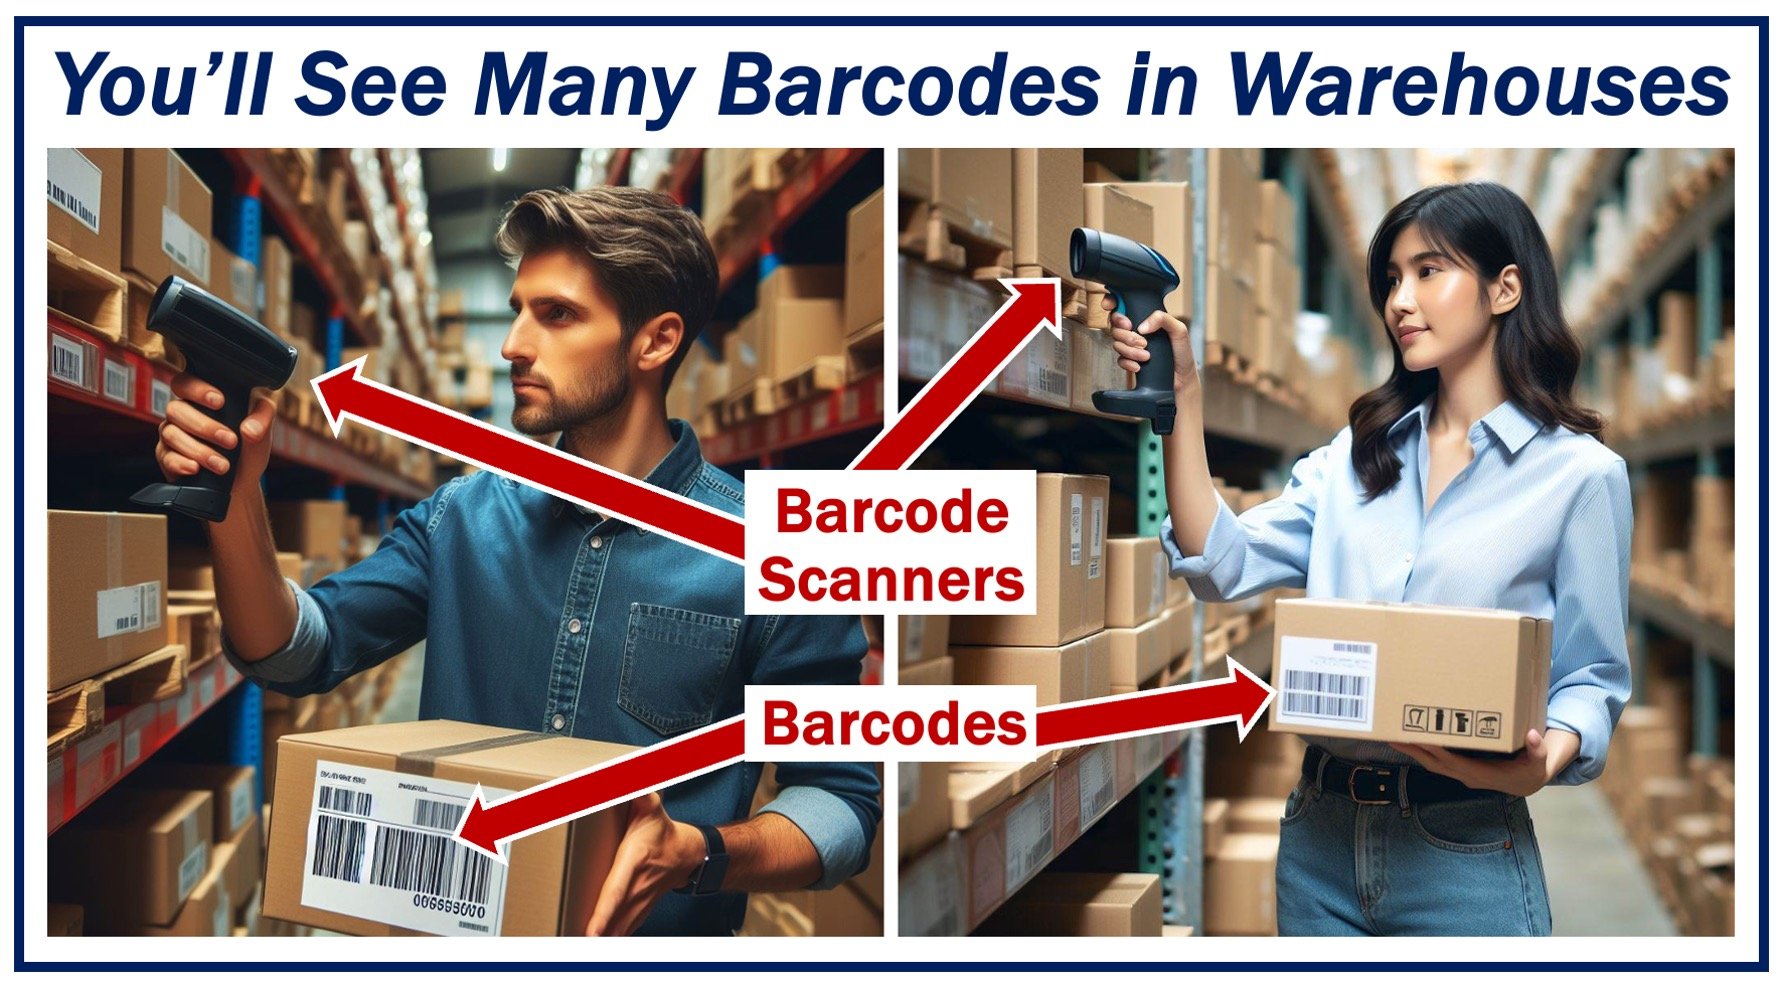 Two image of people scanning barcodes on boxes in a warehouse.